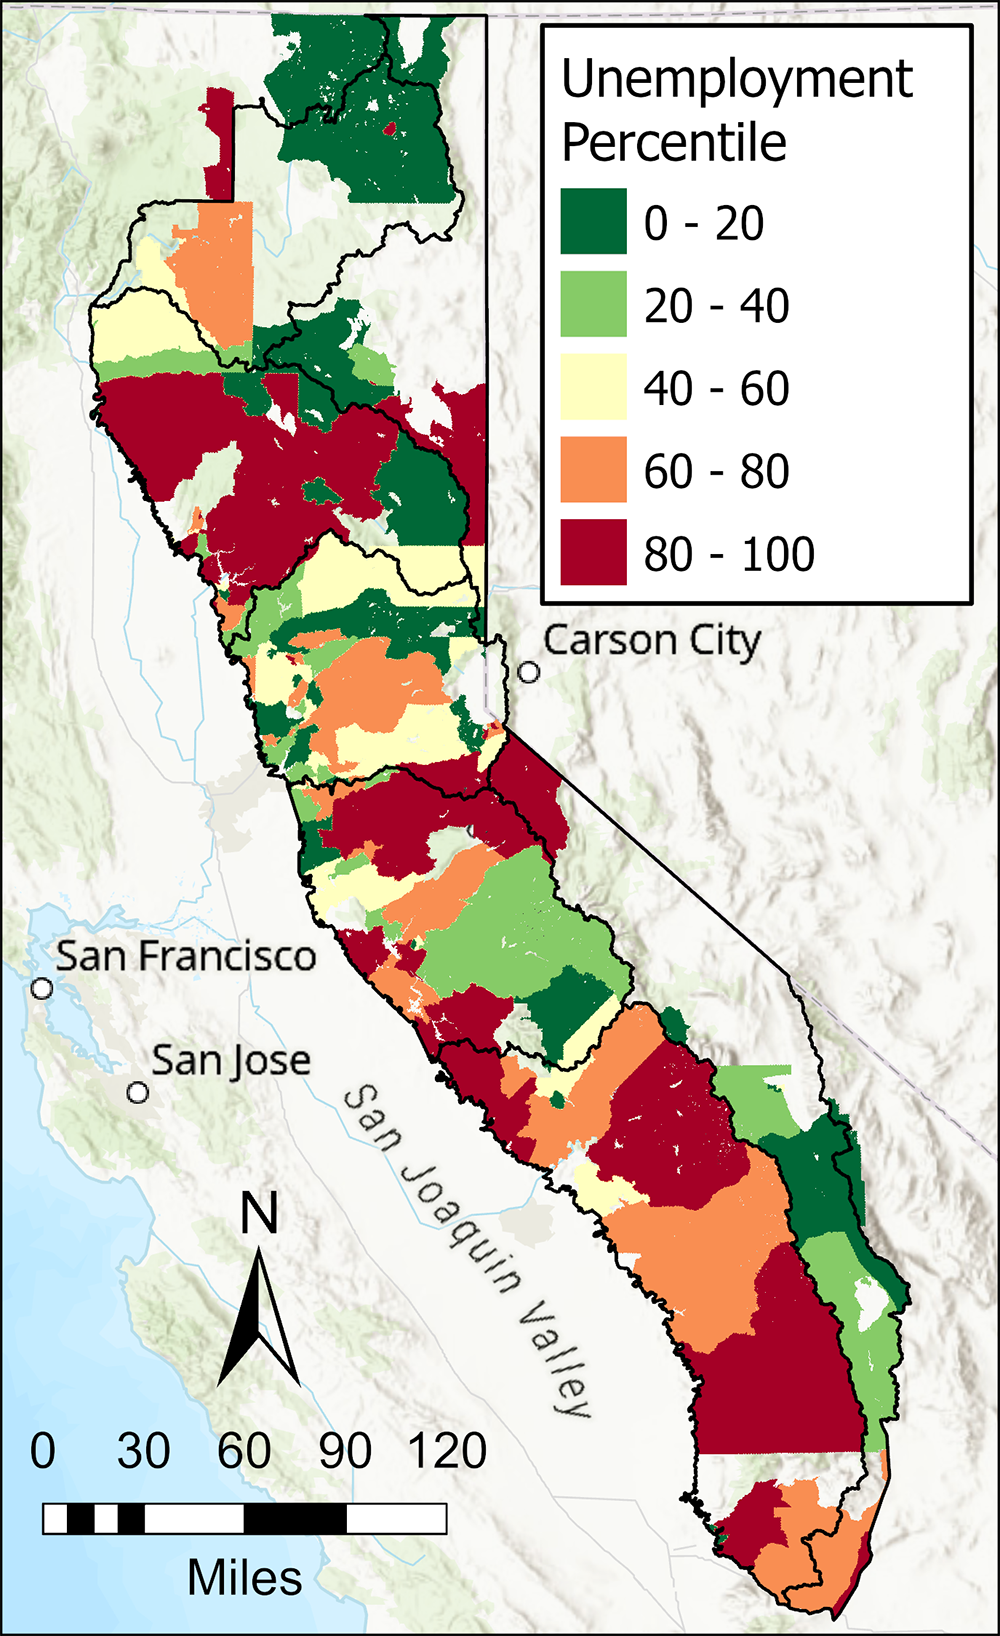 Unemployment Percentile on Map of California